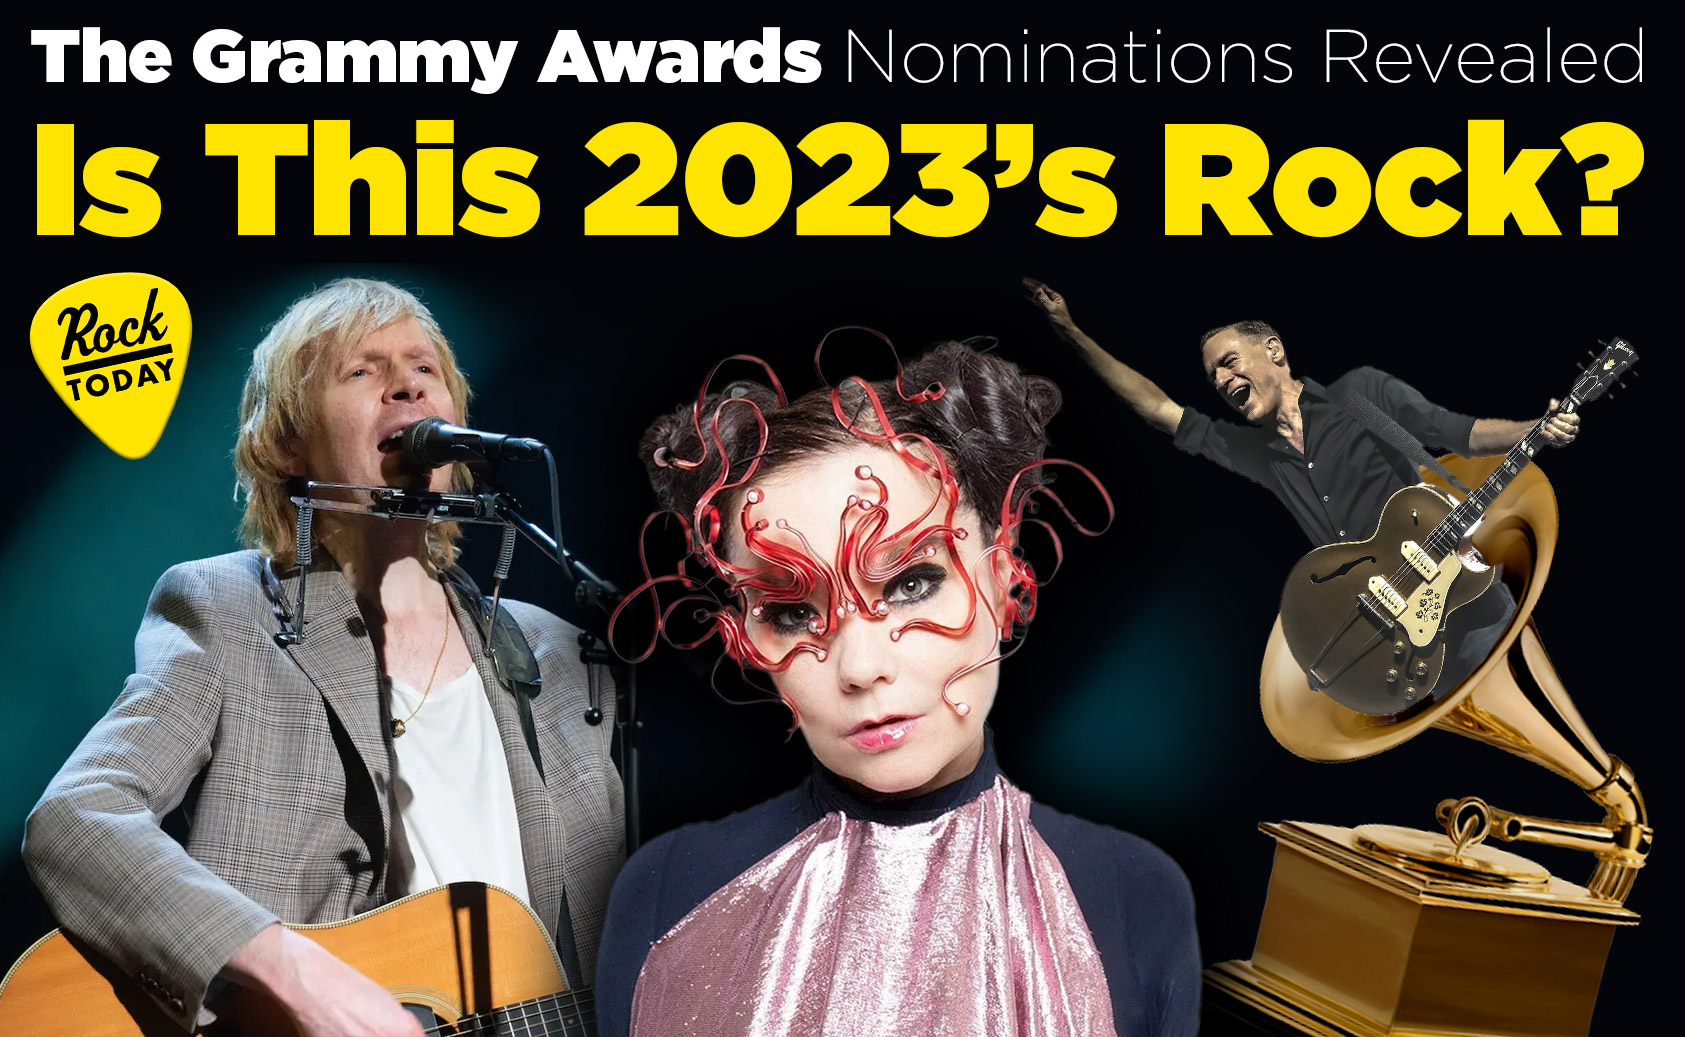 Beck, Björk and Bryan Adams. All three are nominated in the rock categories at the 2023 Grammy Awards.